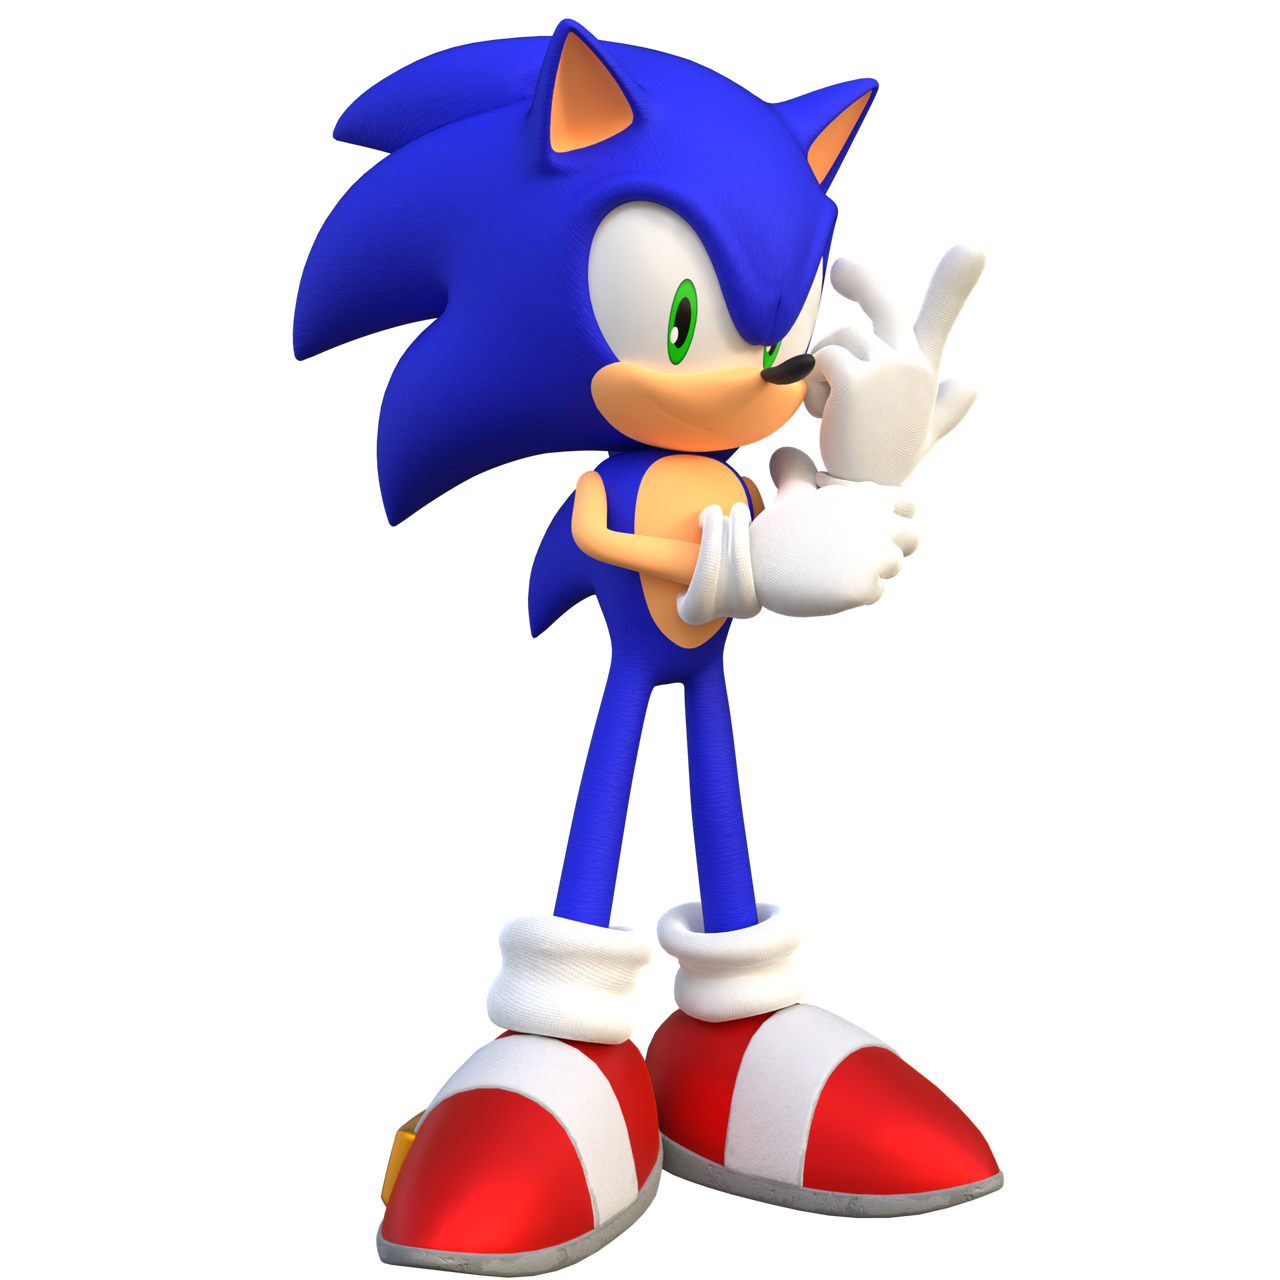 Sonic Frontiers: Final Horizon Render (Sonic) by Edgic-the-Hedgic